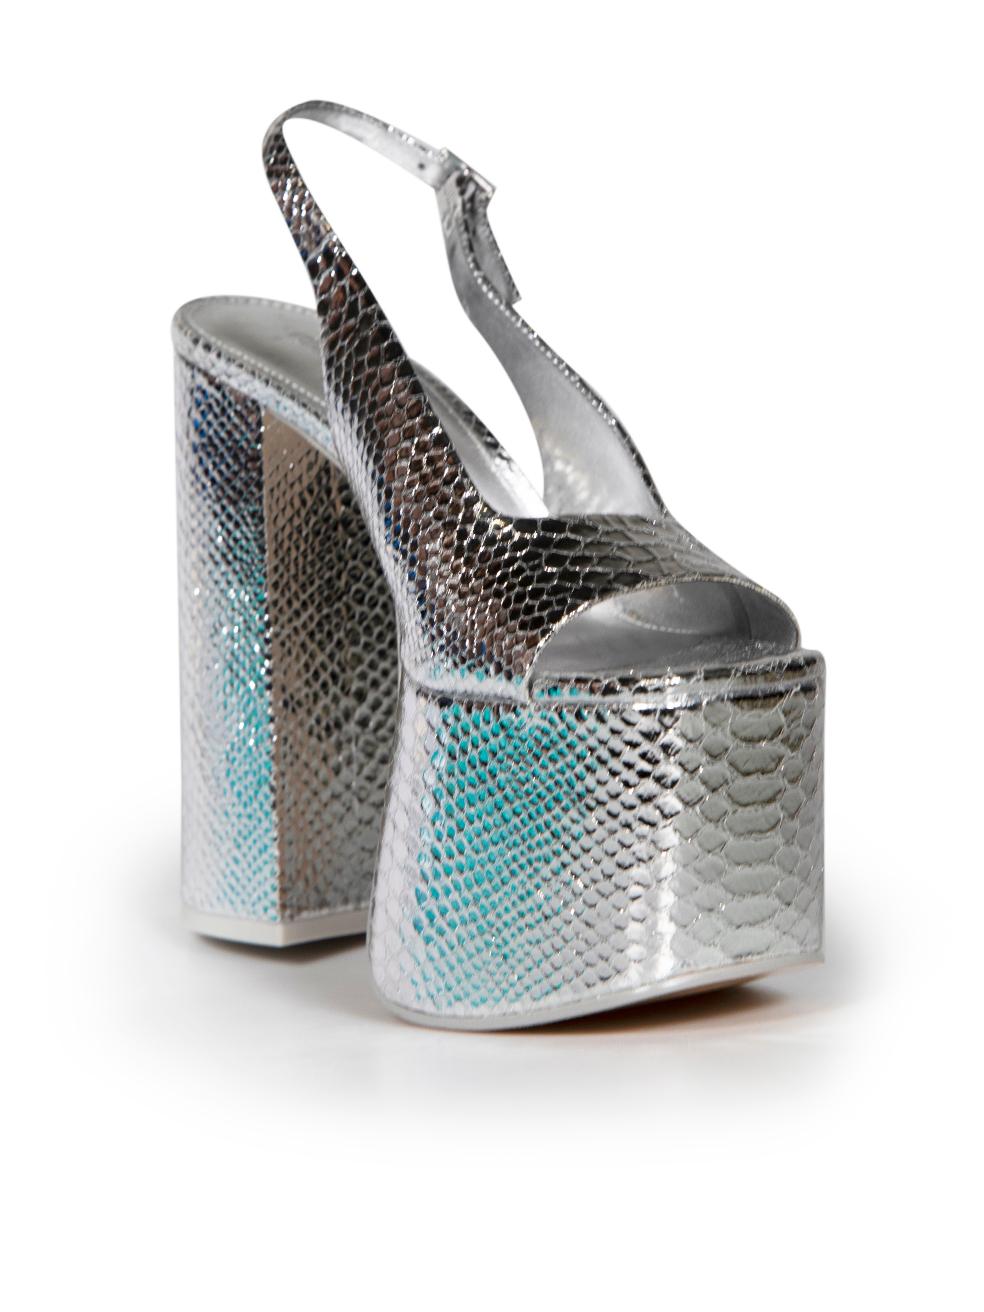 CONDITION is Never worn. No visible wear to shoes is evident on this new Cult Gaia designer resale item.
 
 
 
 Details
 
 
 Silver
 
 Leather
 
 Heels
 
 Python pattern
 
 Platform
 
 High heeled
 
 Adjustable slingback strap
 
 Peep toe
 
 
 
 
 
